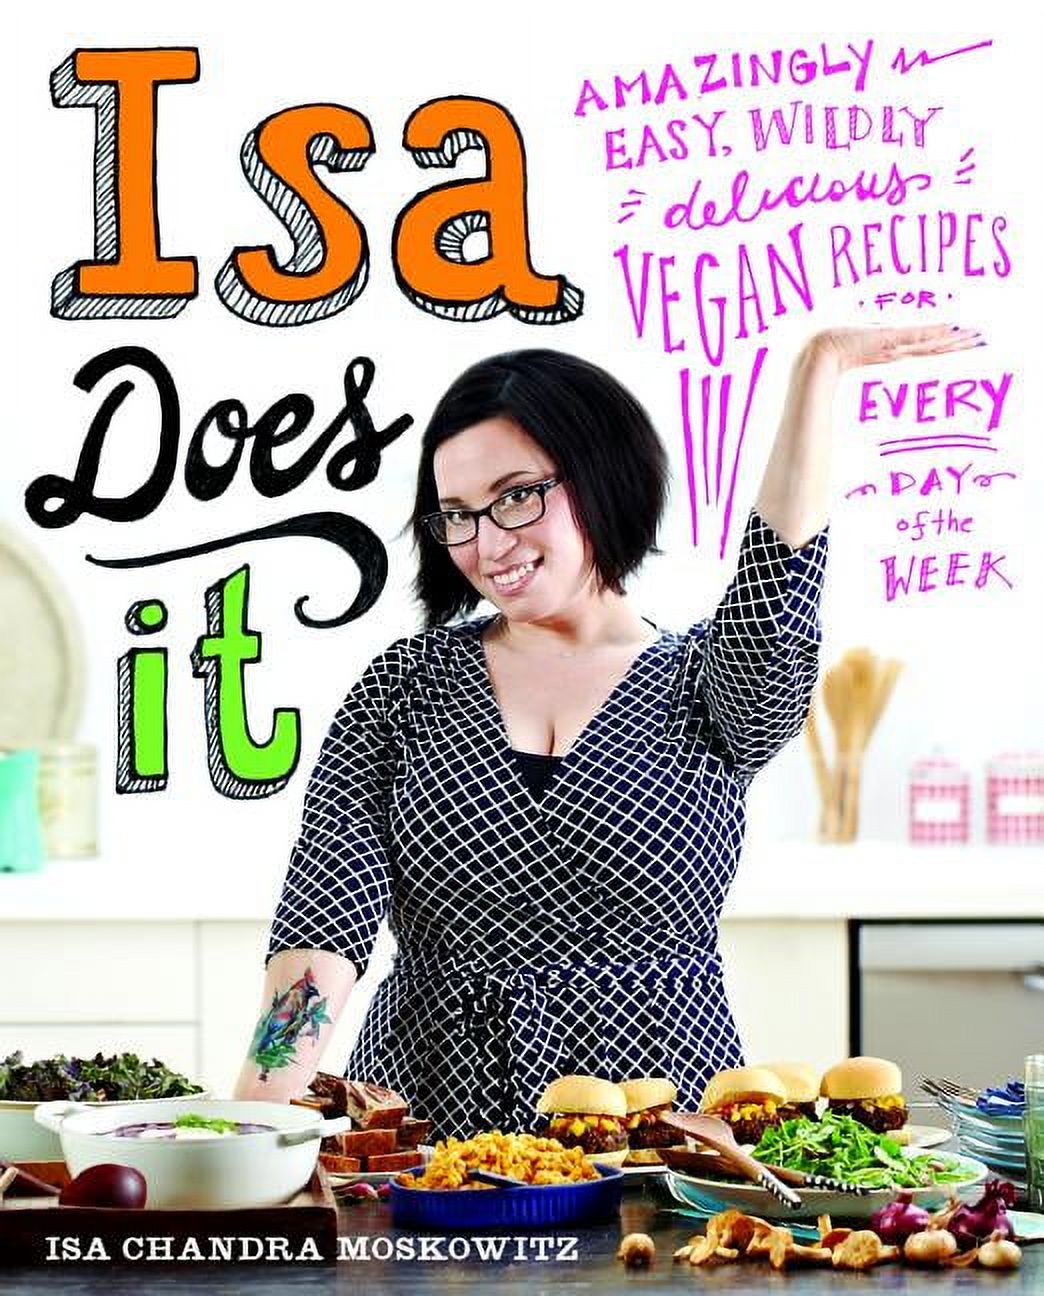 Isa Does It: Amazingly Easy, Wildly Delicious Vegan Recipes for Every Day of the Week - image 1 of 4